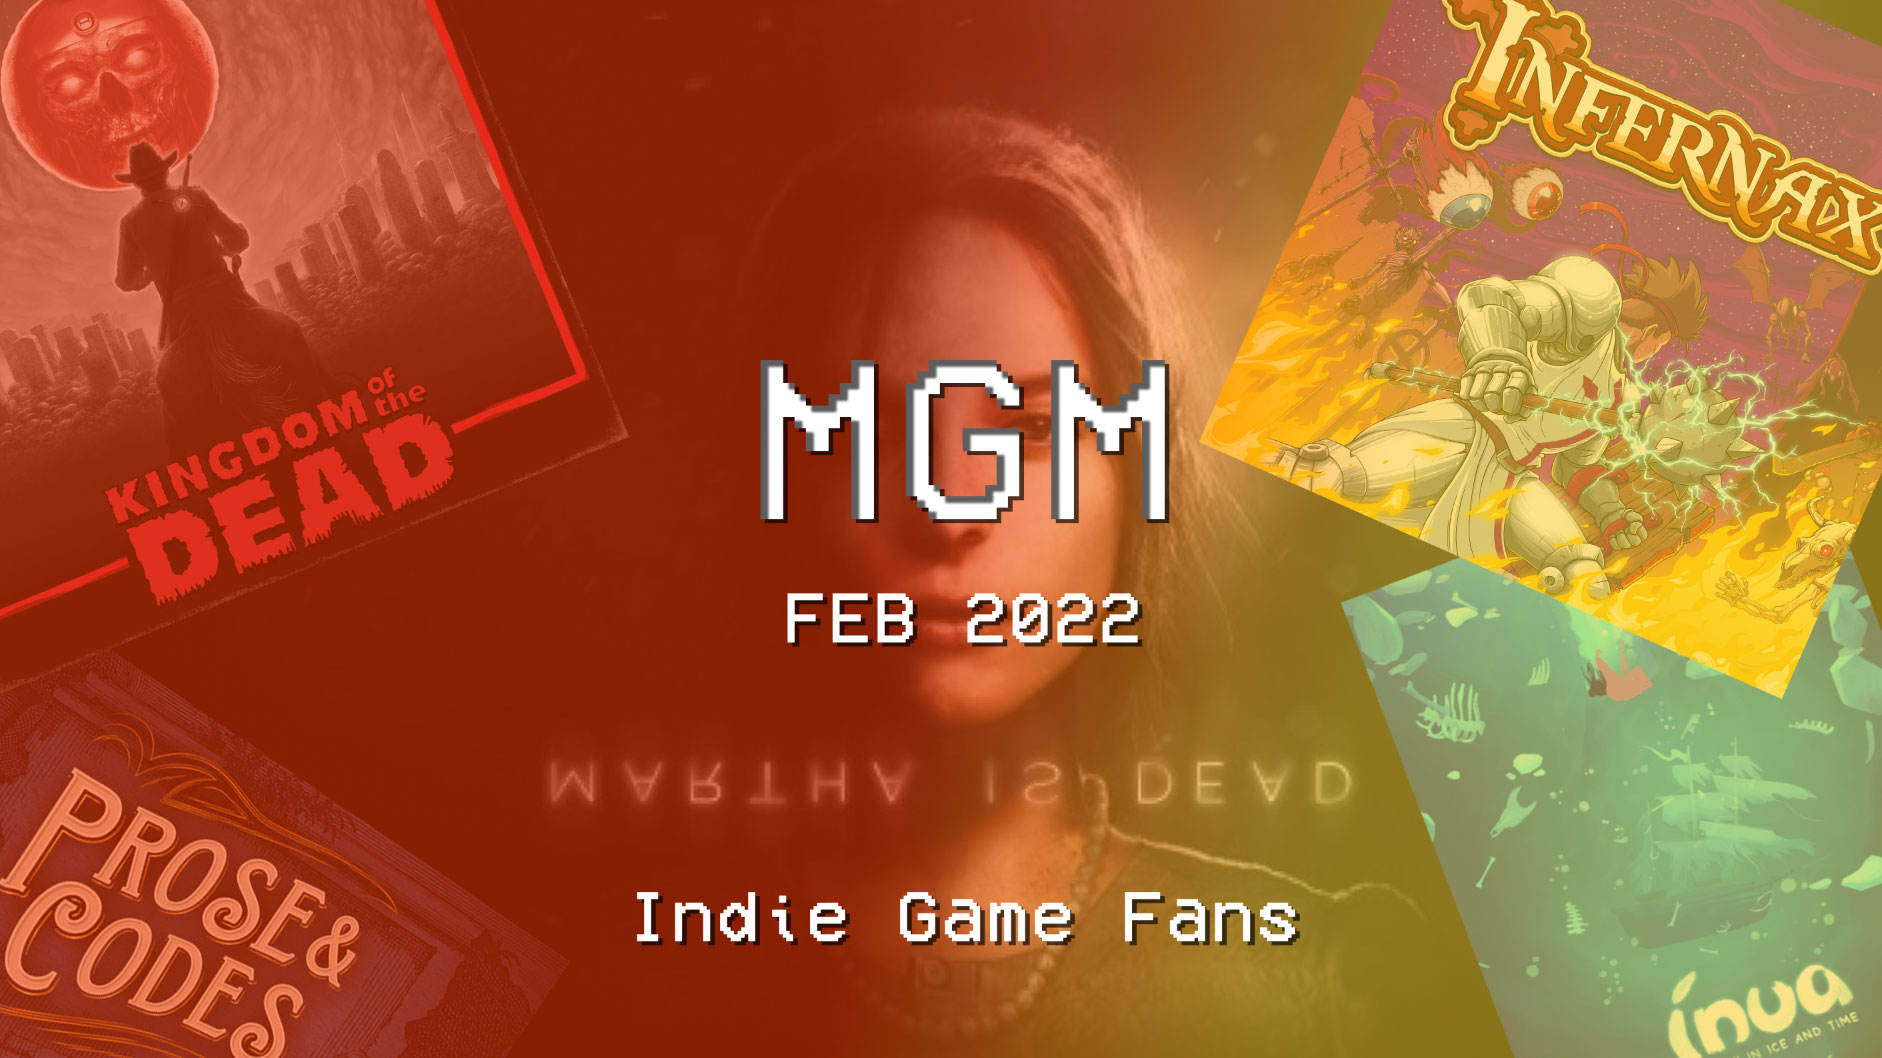 Missed Games Monthly Feb 2022 Game News Indie Game Fans News